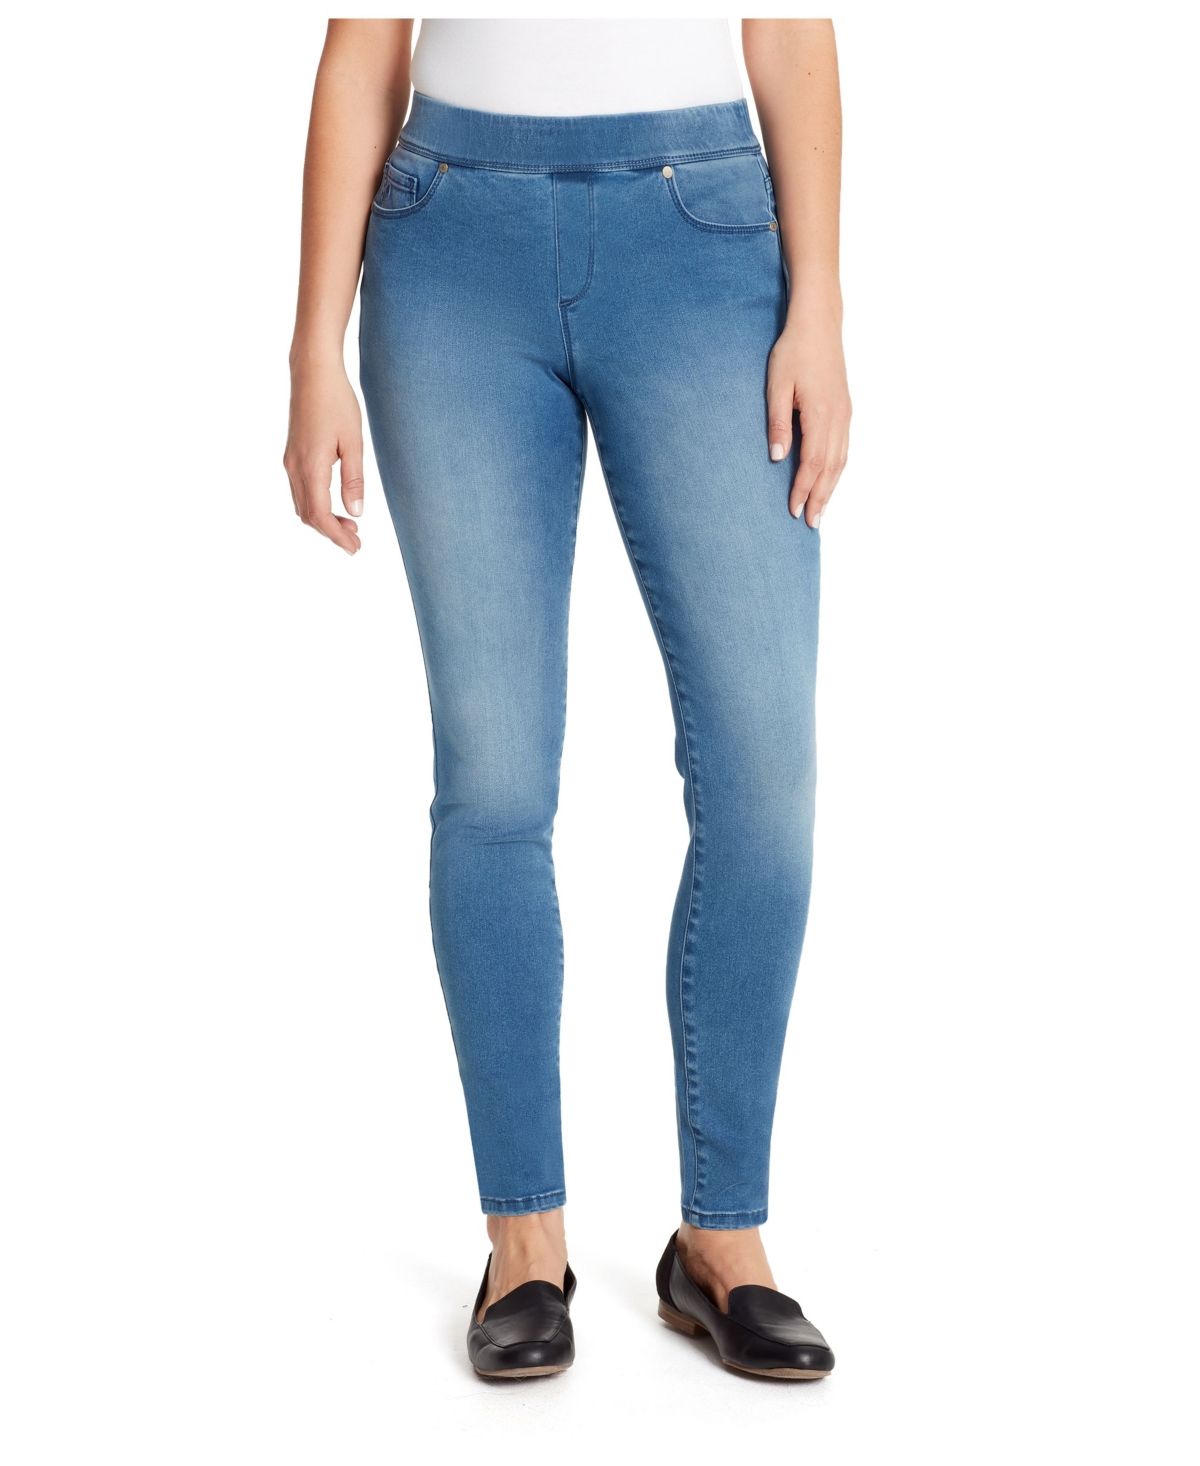 Avery Pull-On Slim Jeans - Frisco Wash